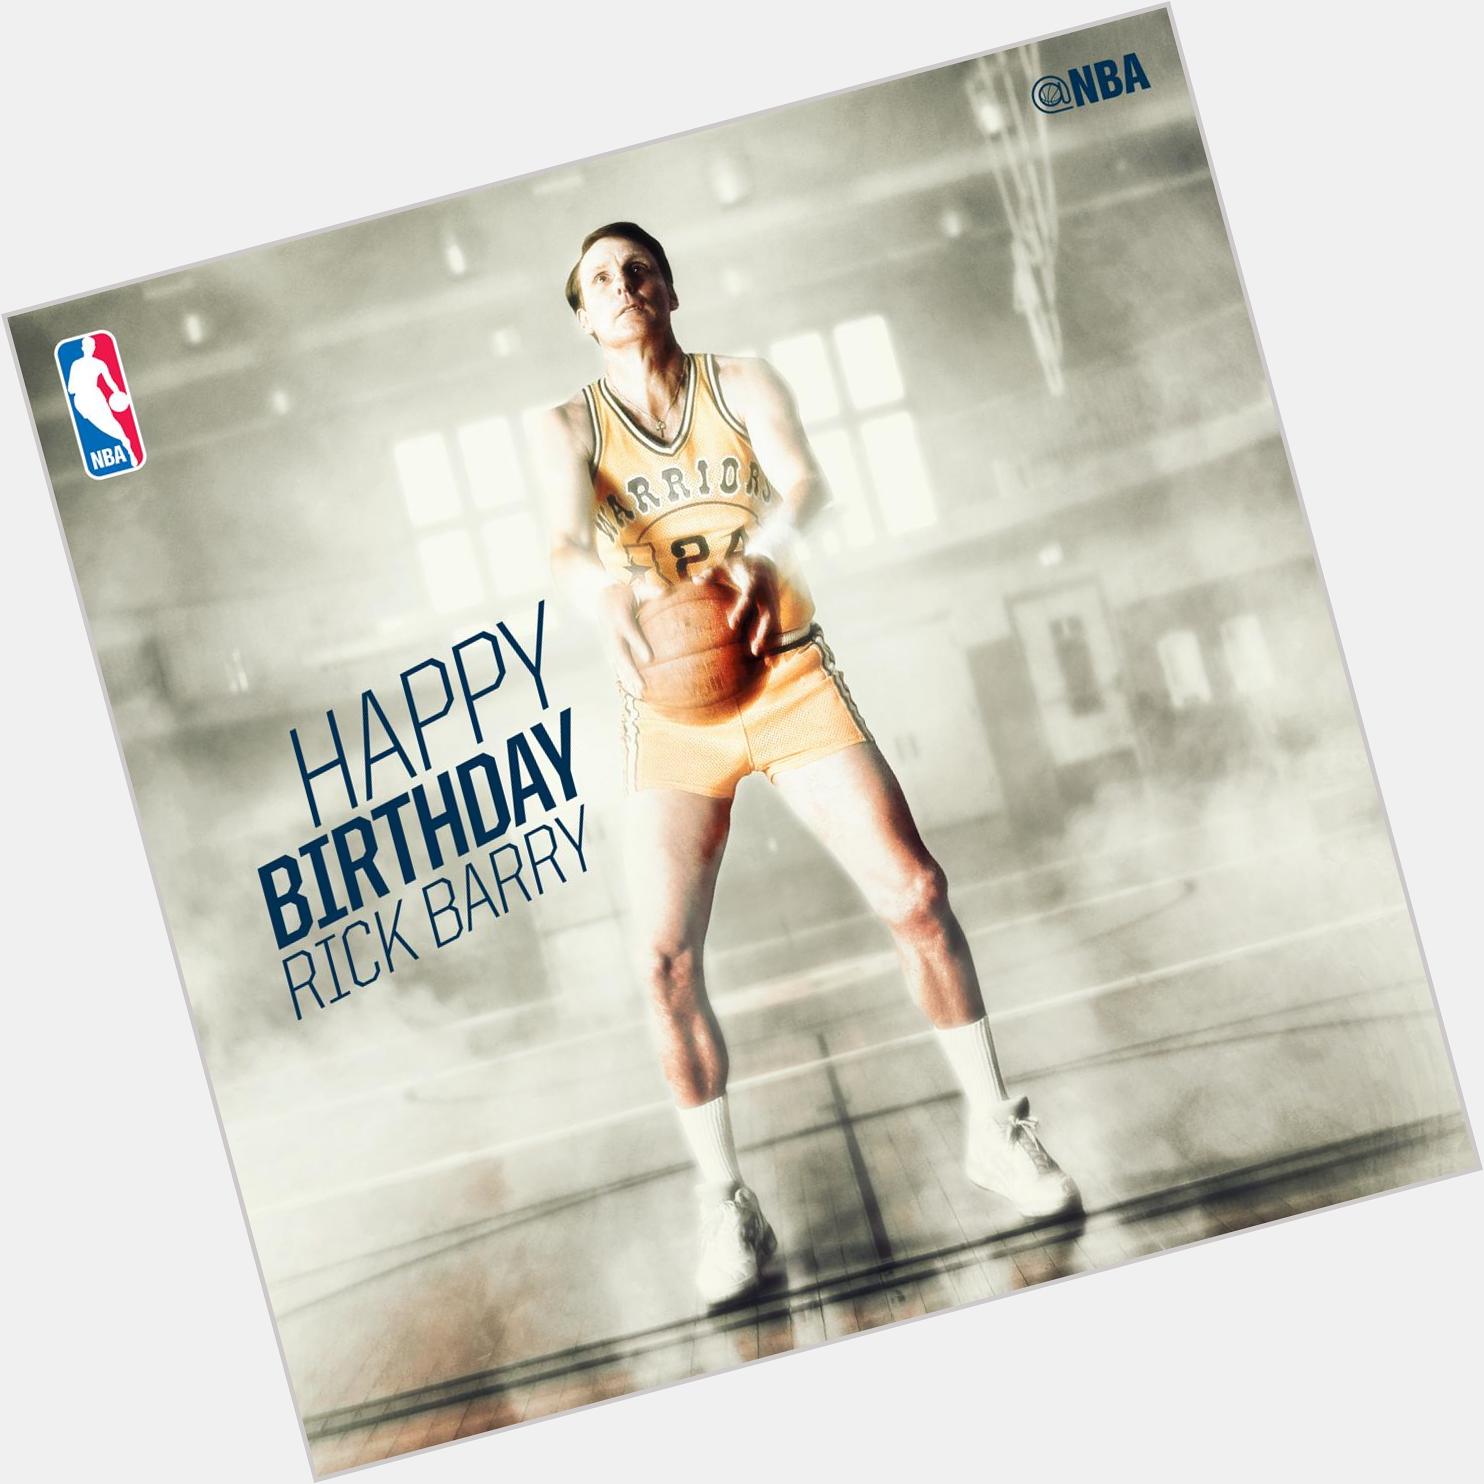 Join us in wishing Hall of Famer RICK BARRY a HAPPY BIRTHDAY! 